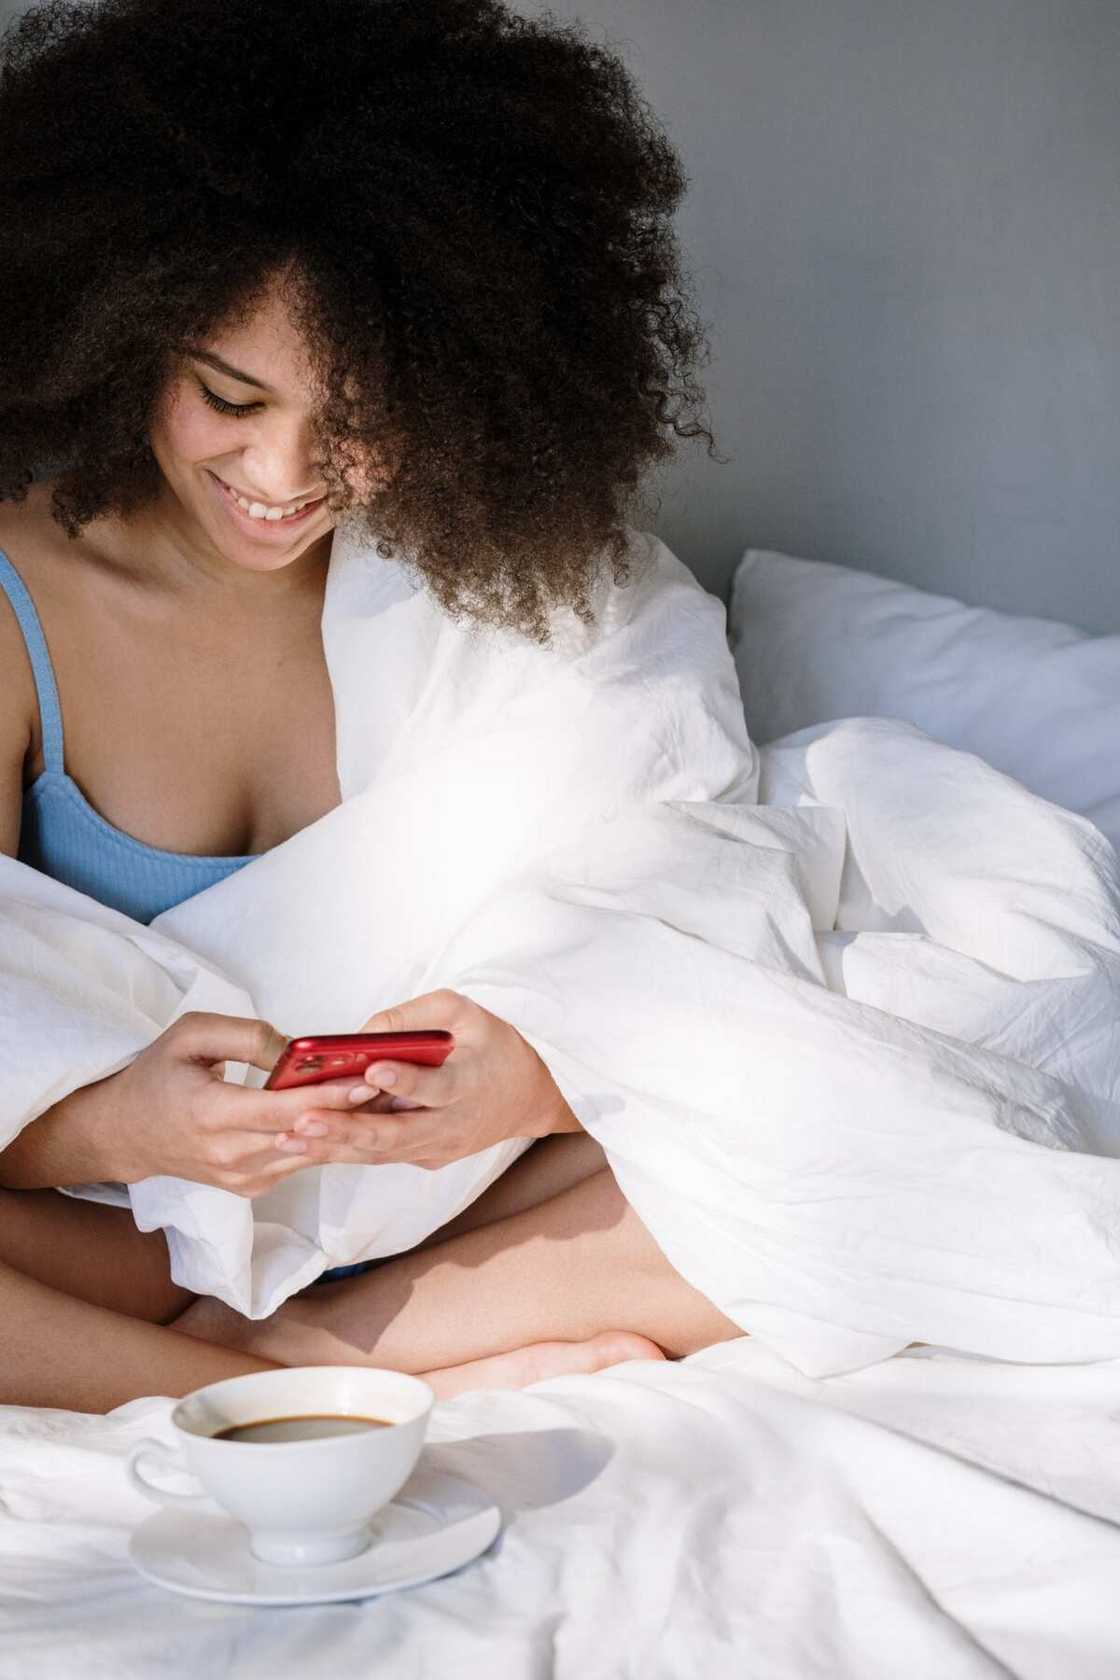 How do you keep a guy's attention over text?